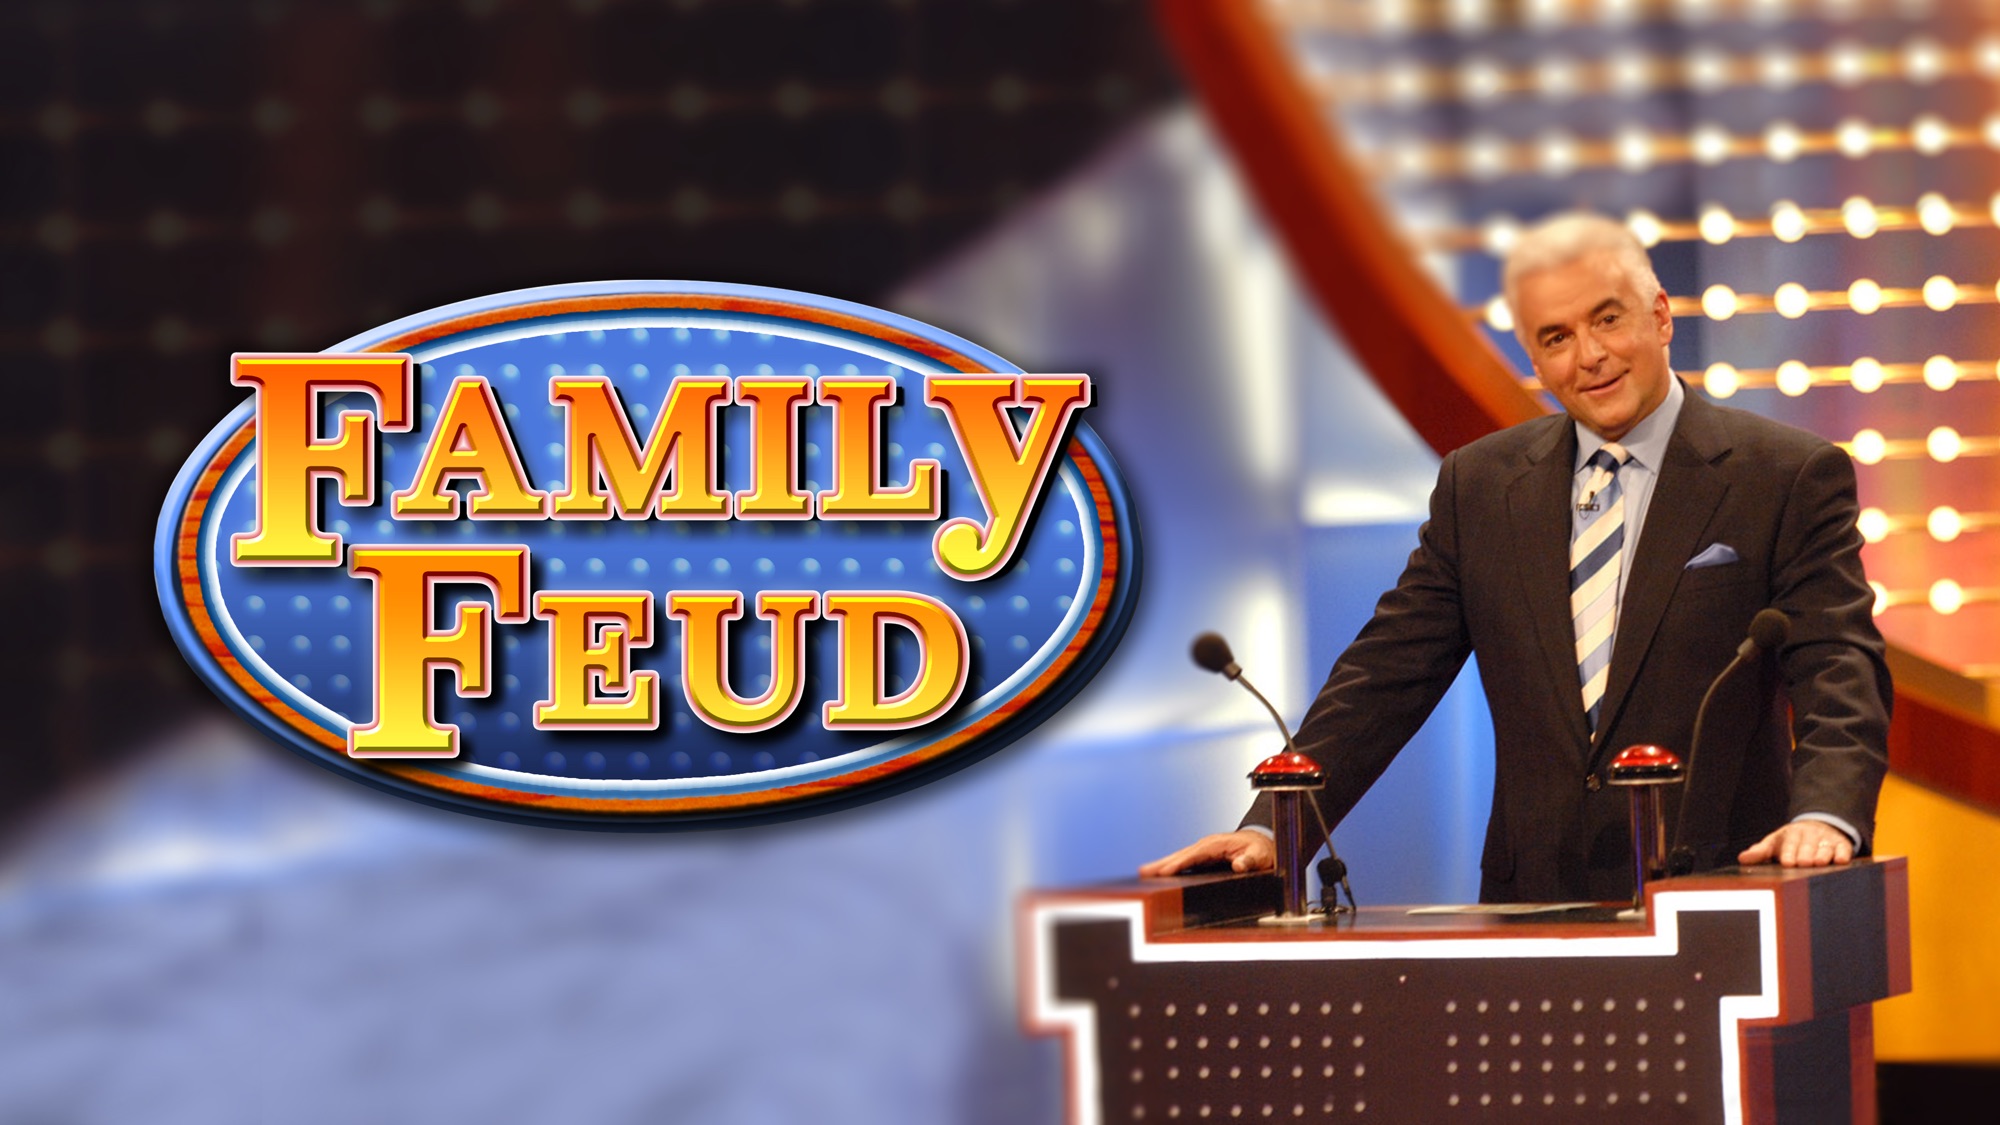 family feud 2 free download full version